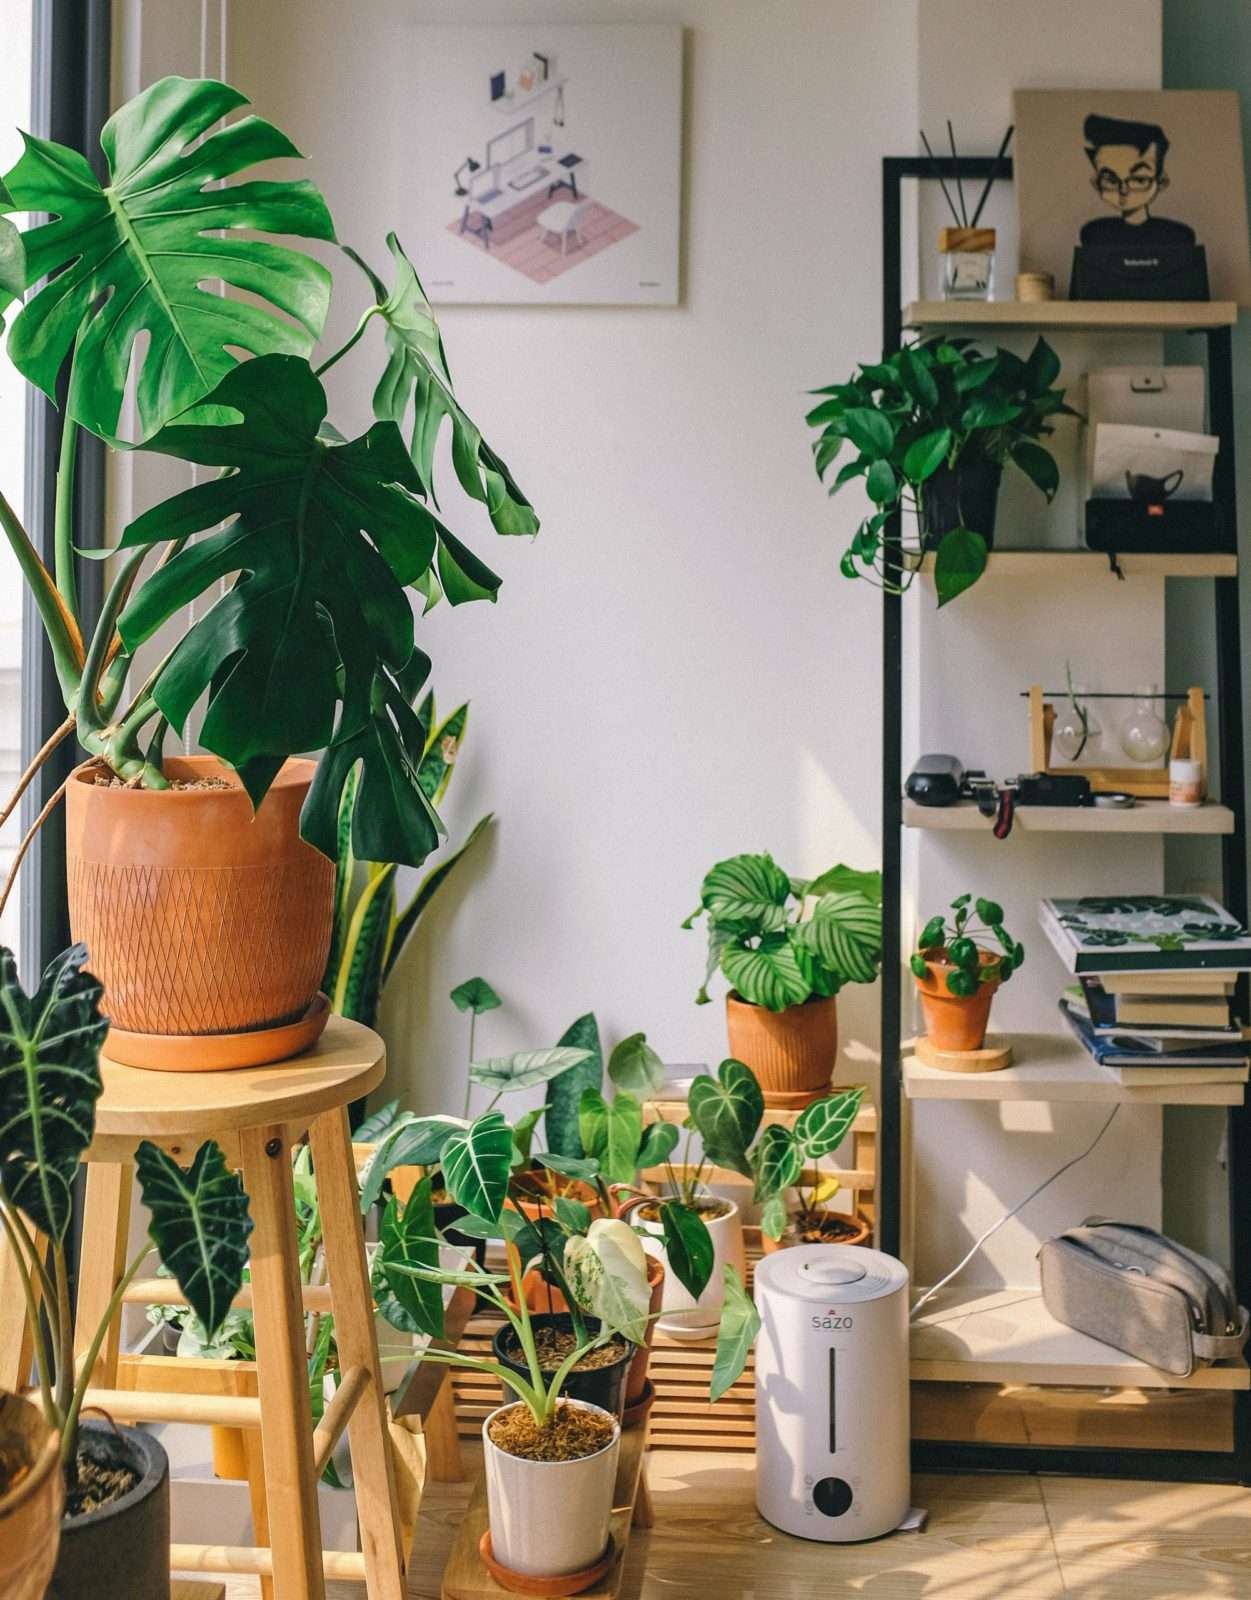 Becoming a plant parent